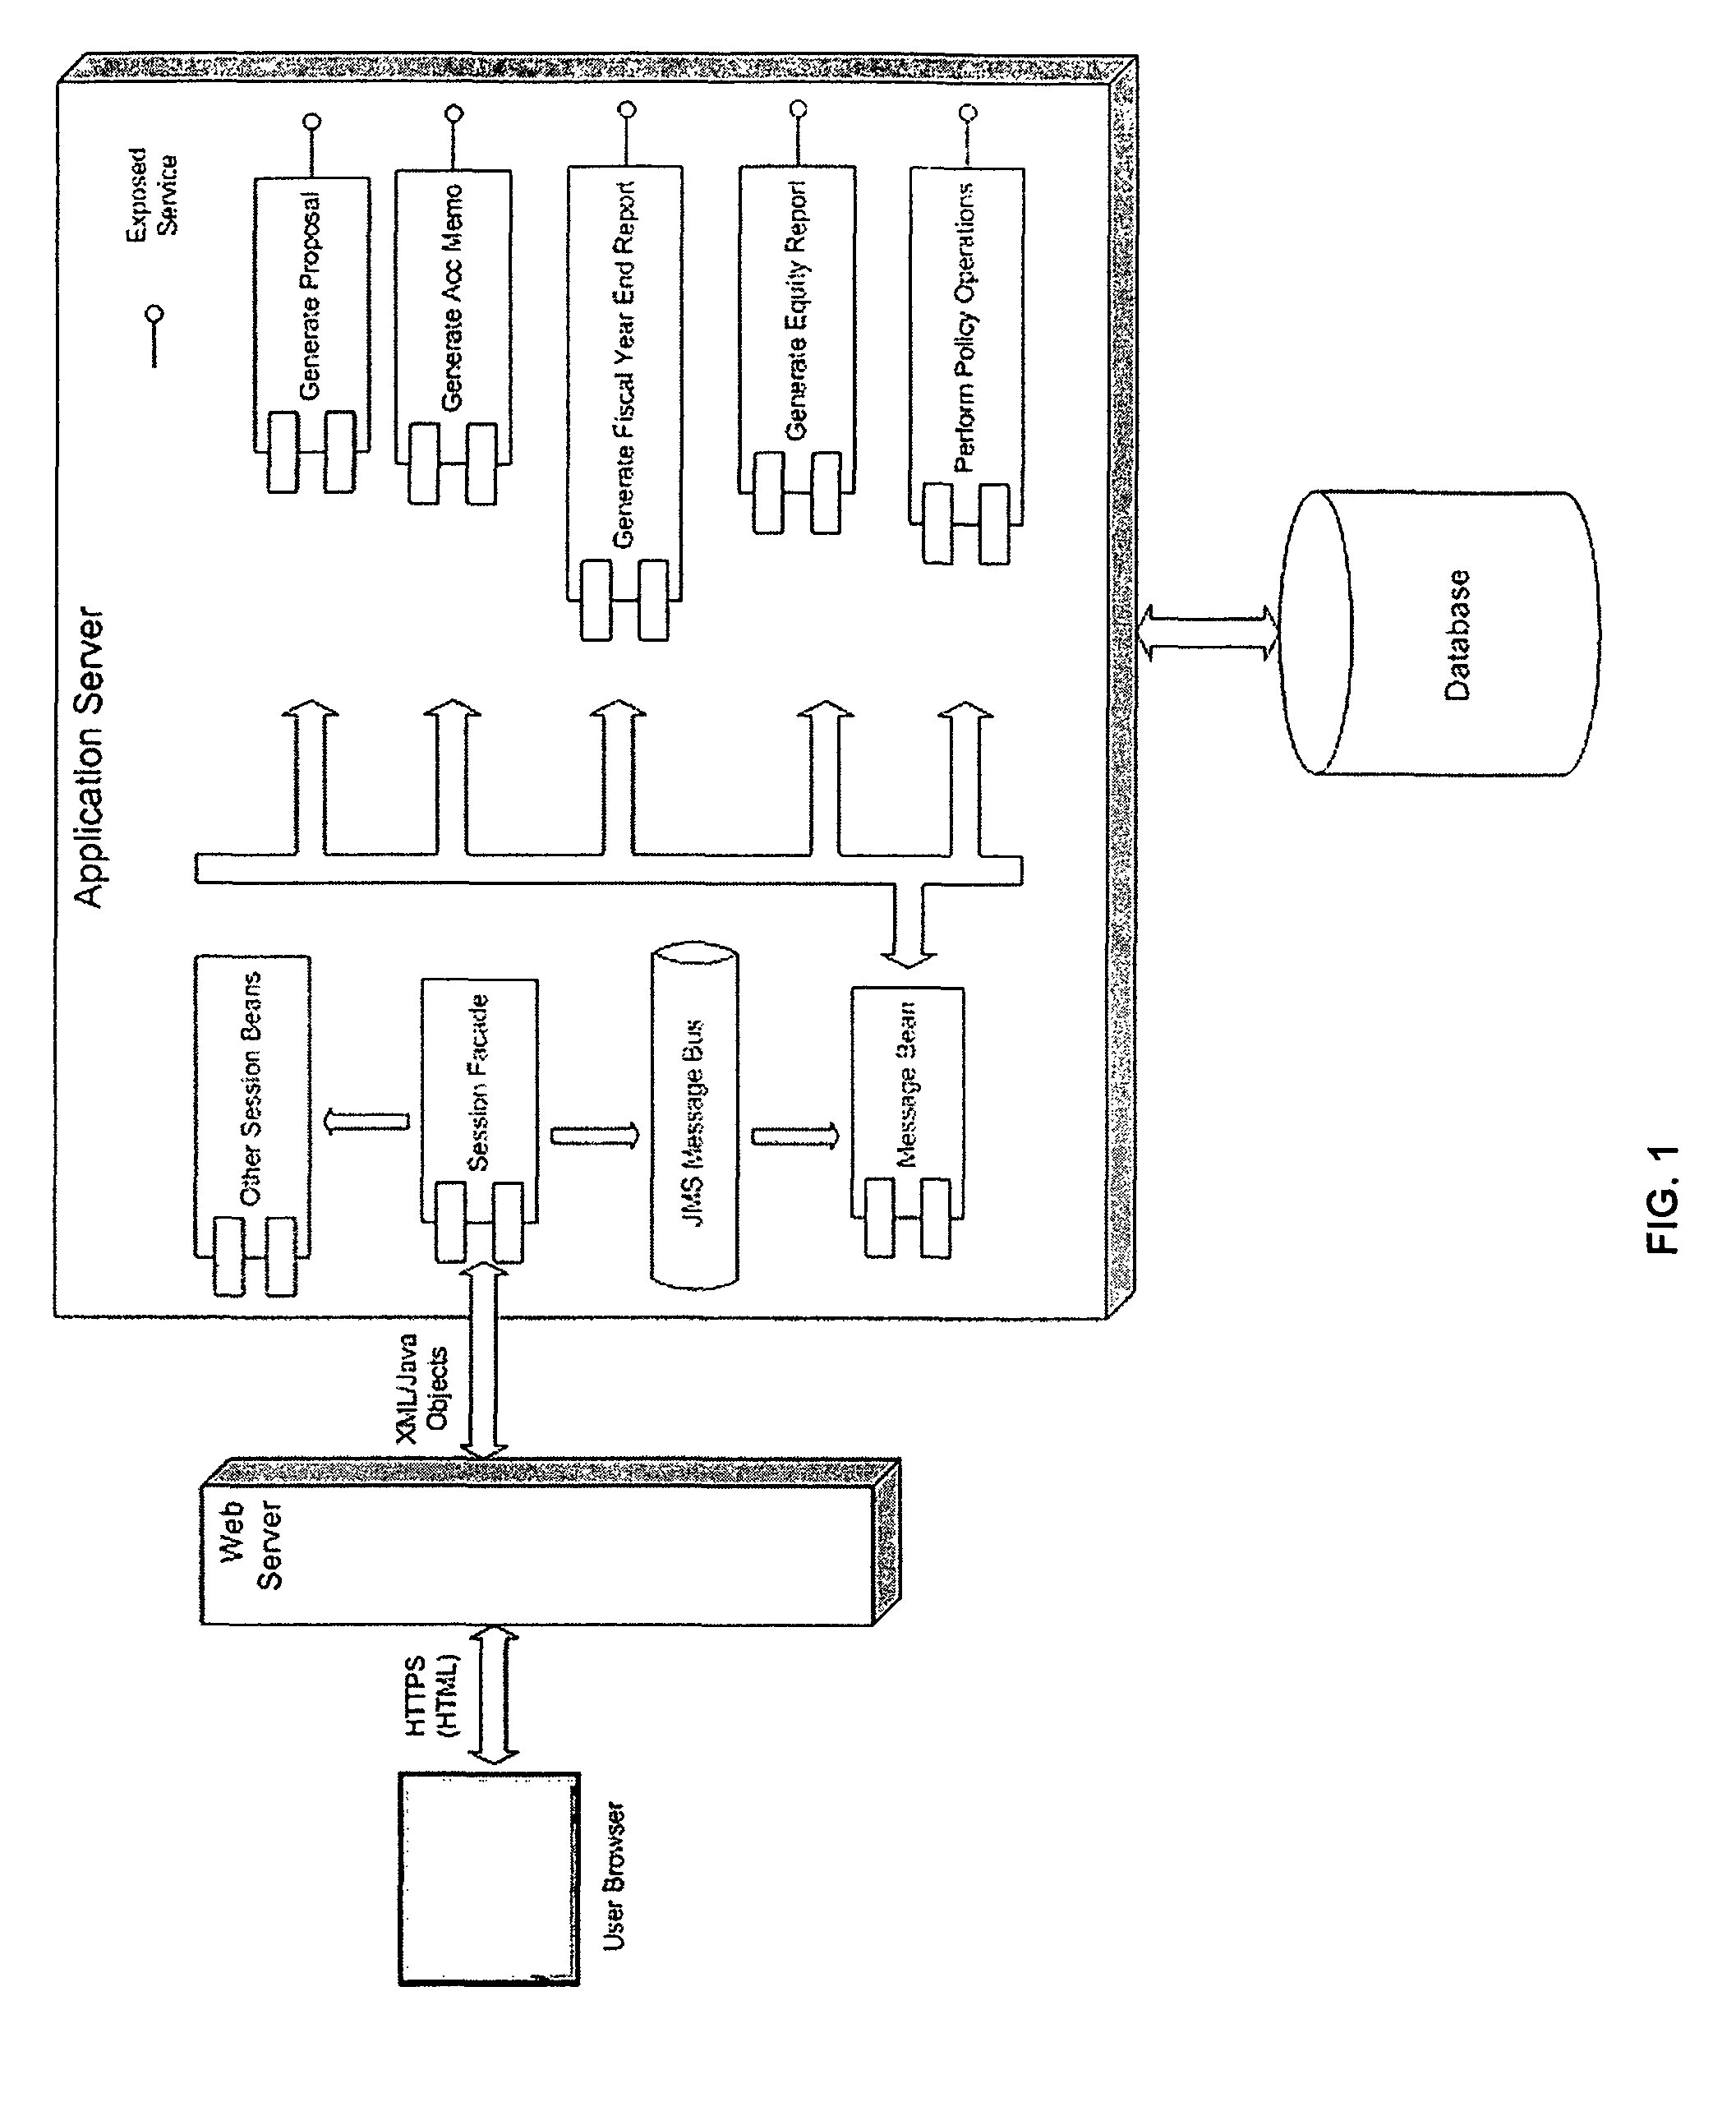 System and methods for tracking the relative interests of the parties to an insurance policy